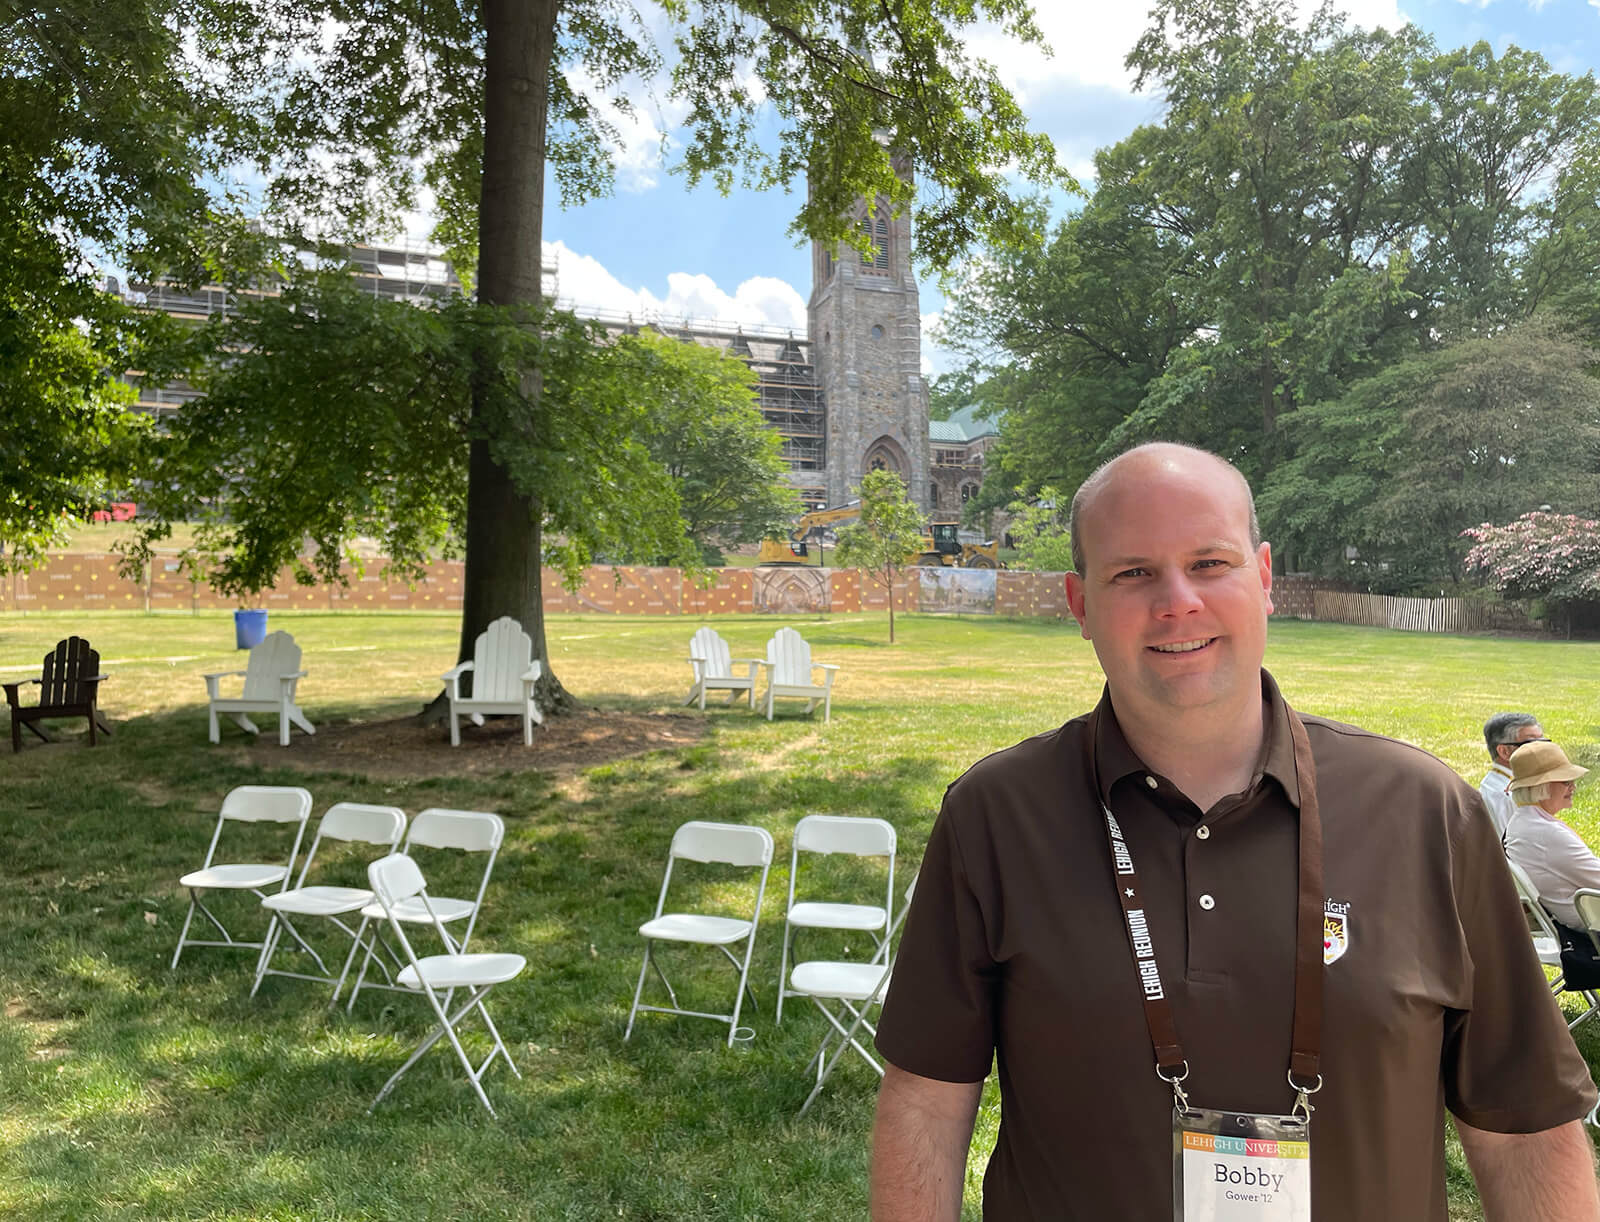 Alumnus stands in front of the University Center construction site wearing a brown Lehigh polo shirt lanyard with a name tag